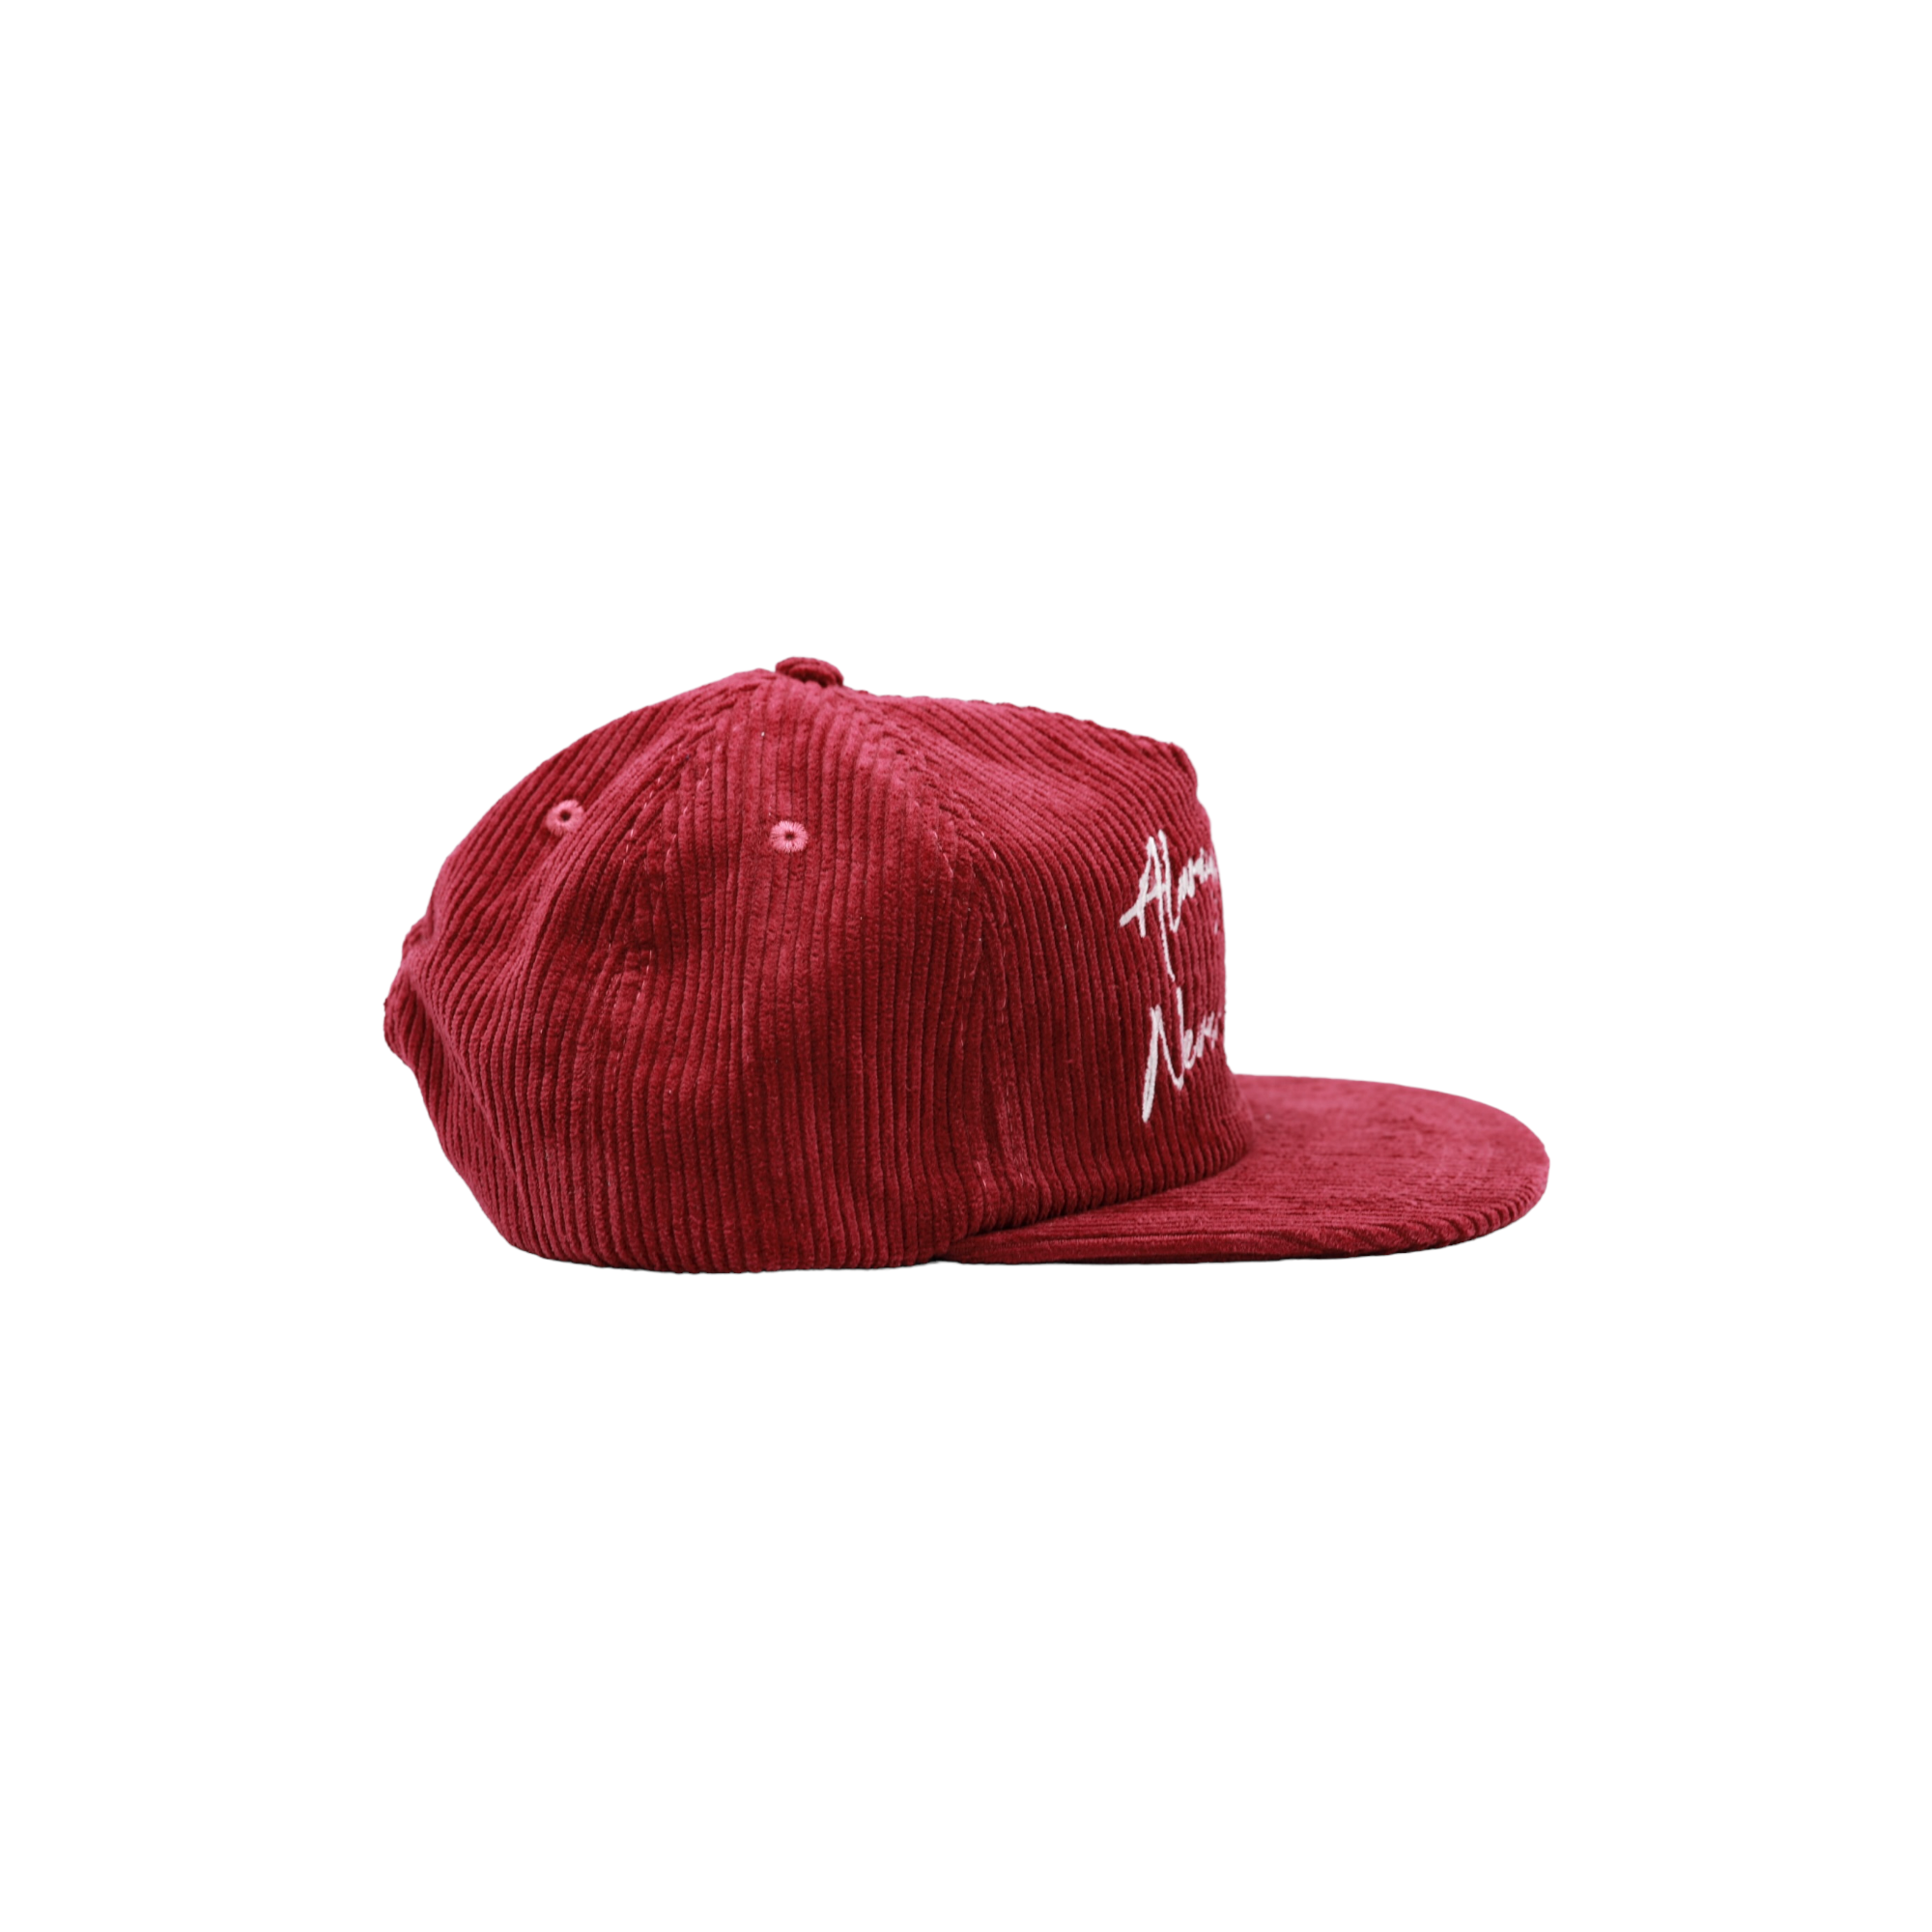 Painters Corduroy Never Them - – Burgundy Us, PericoLimited Always Cap